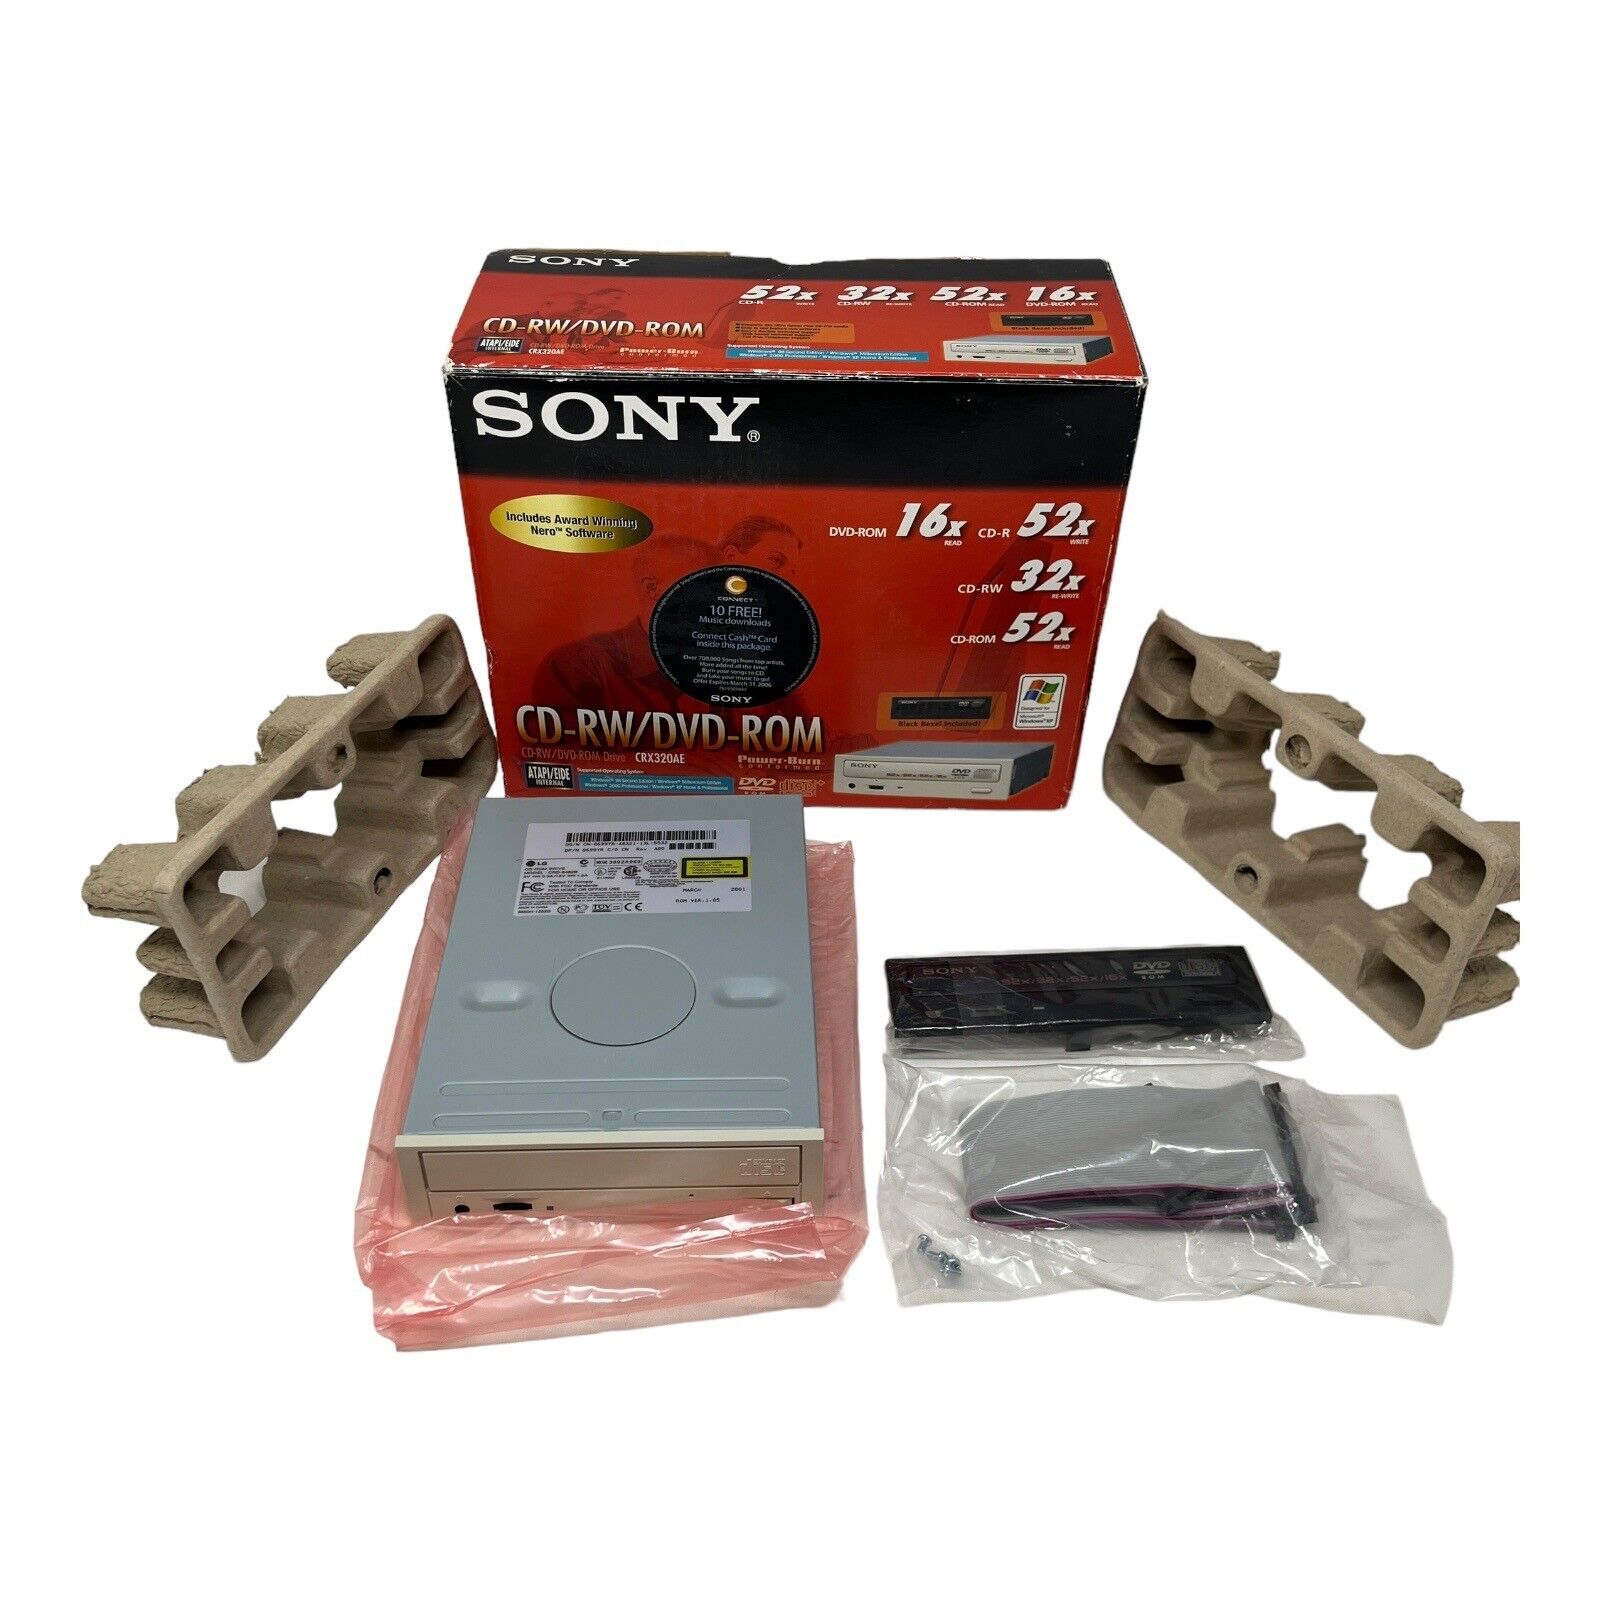 Vintage Sony CRX-320A CD-RW/DVD-ROM Drive (Exchangeable Face) NEW OPEN BOX